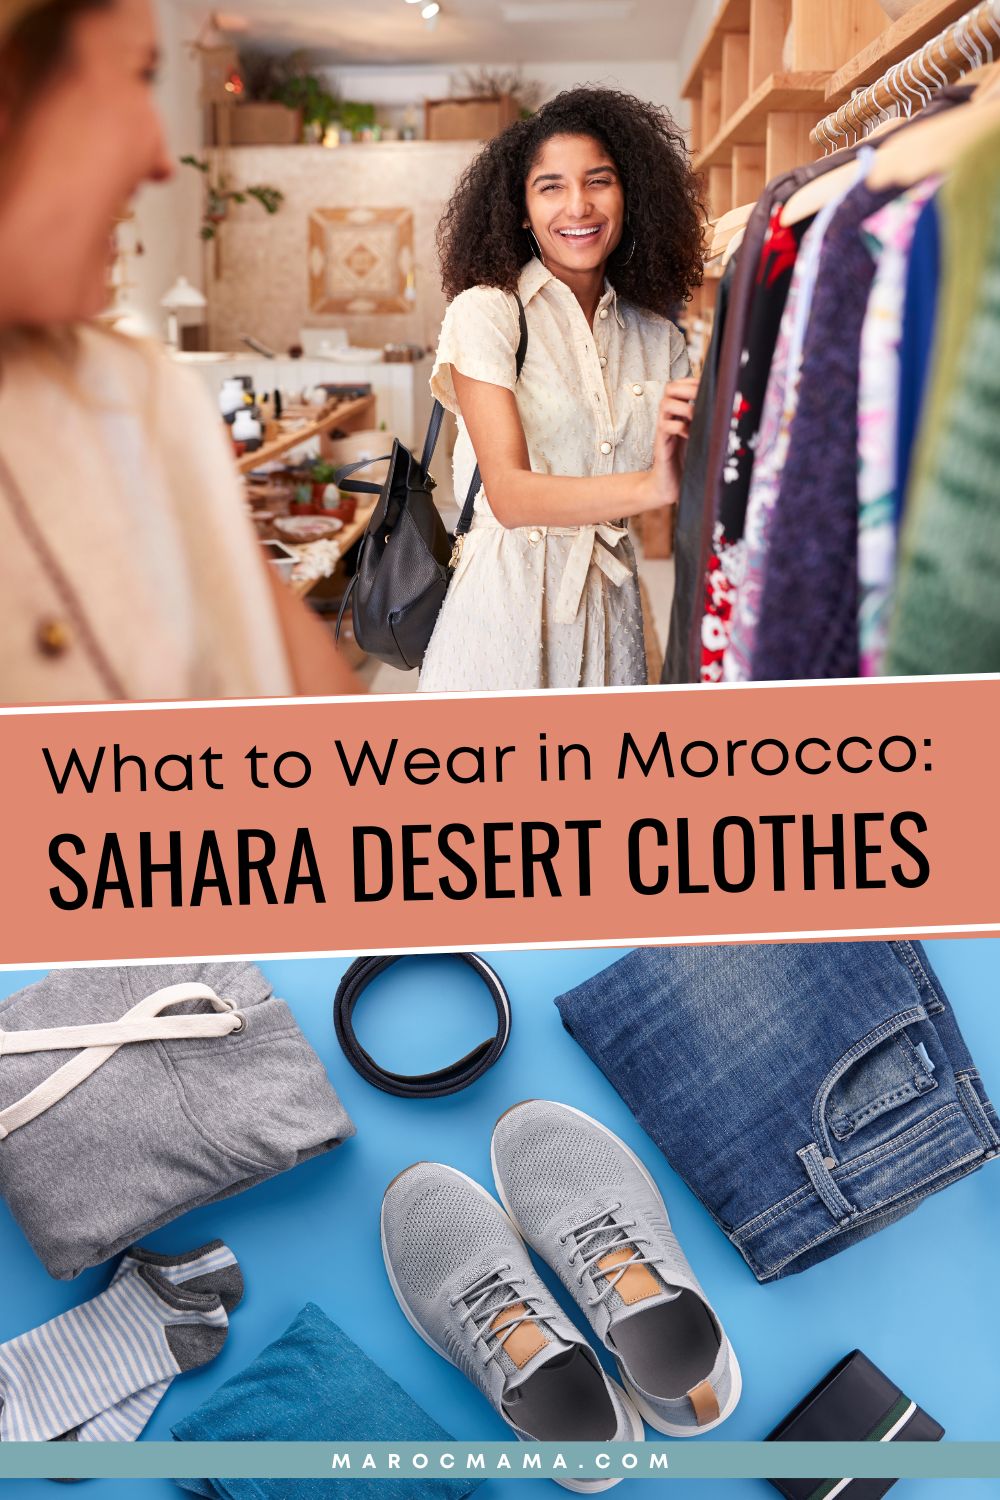 What to Wear in Morocco: Sahara Desert Clothes